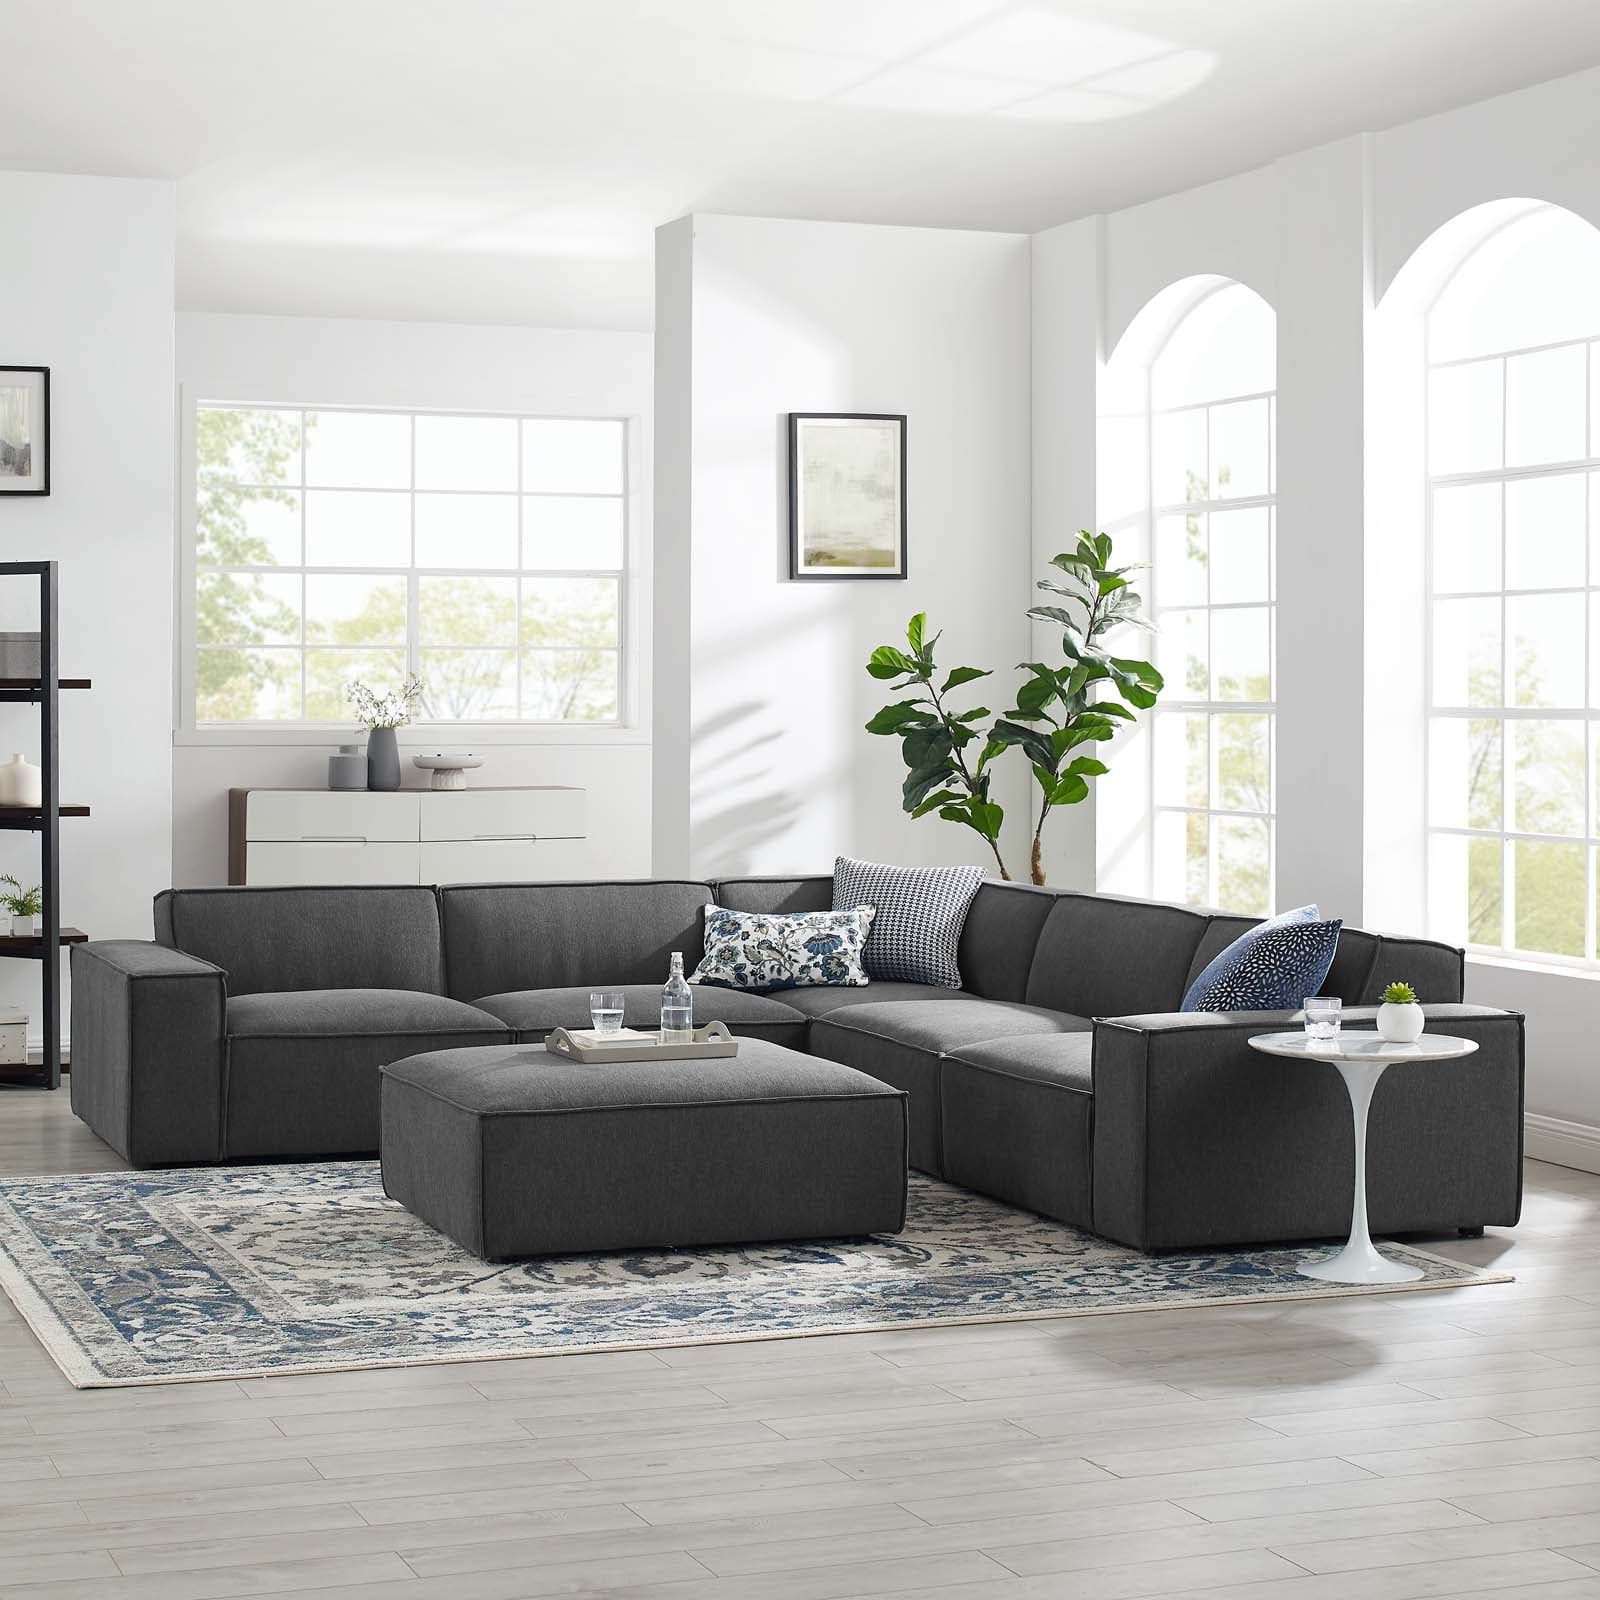 Newest Sofas In Multiple Colors Intended For Modway Restore 6 Piece Sectional Sofa, Multiple Colors – Walmart (View 4 of 15)